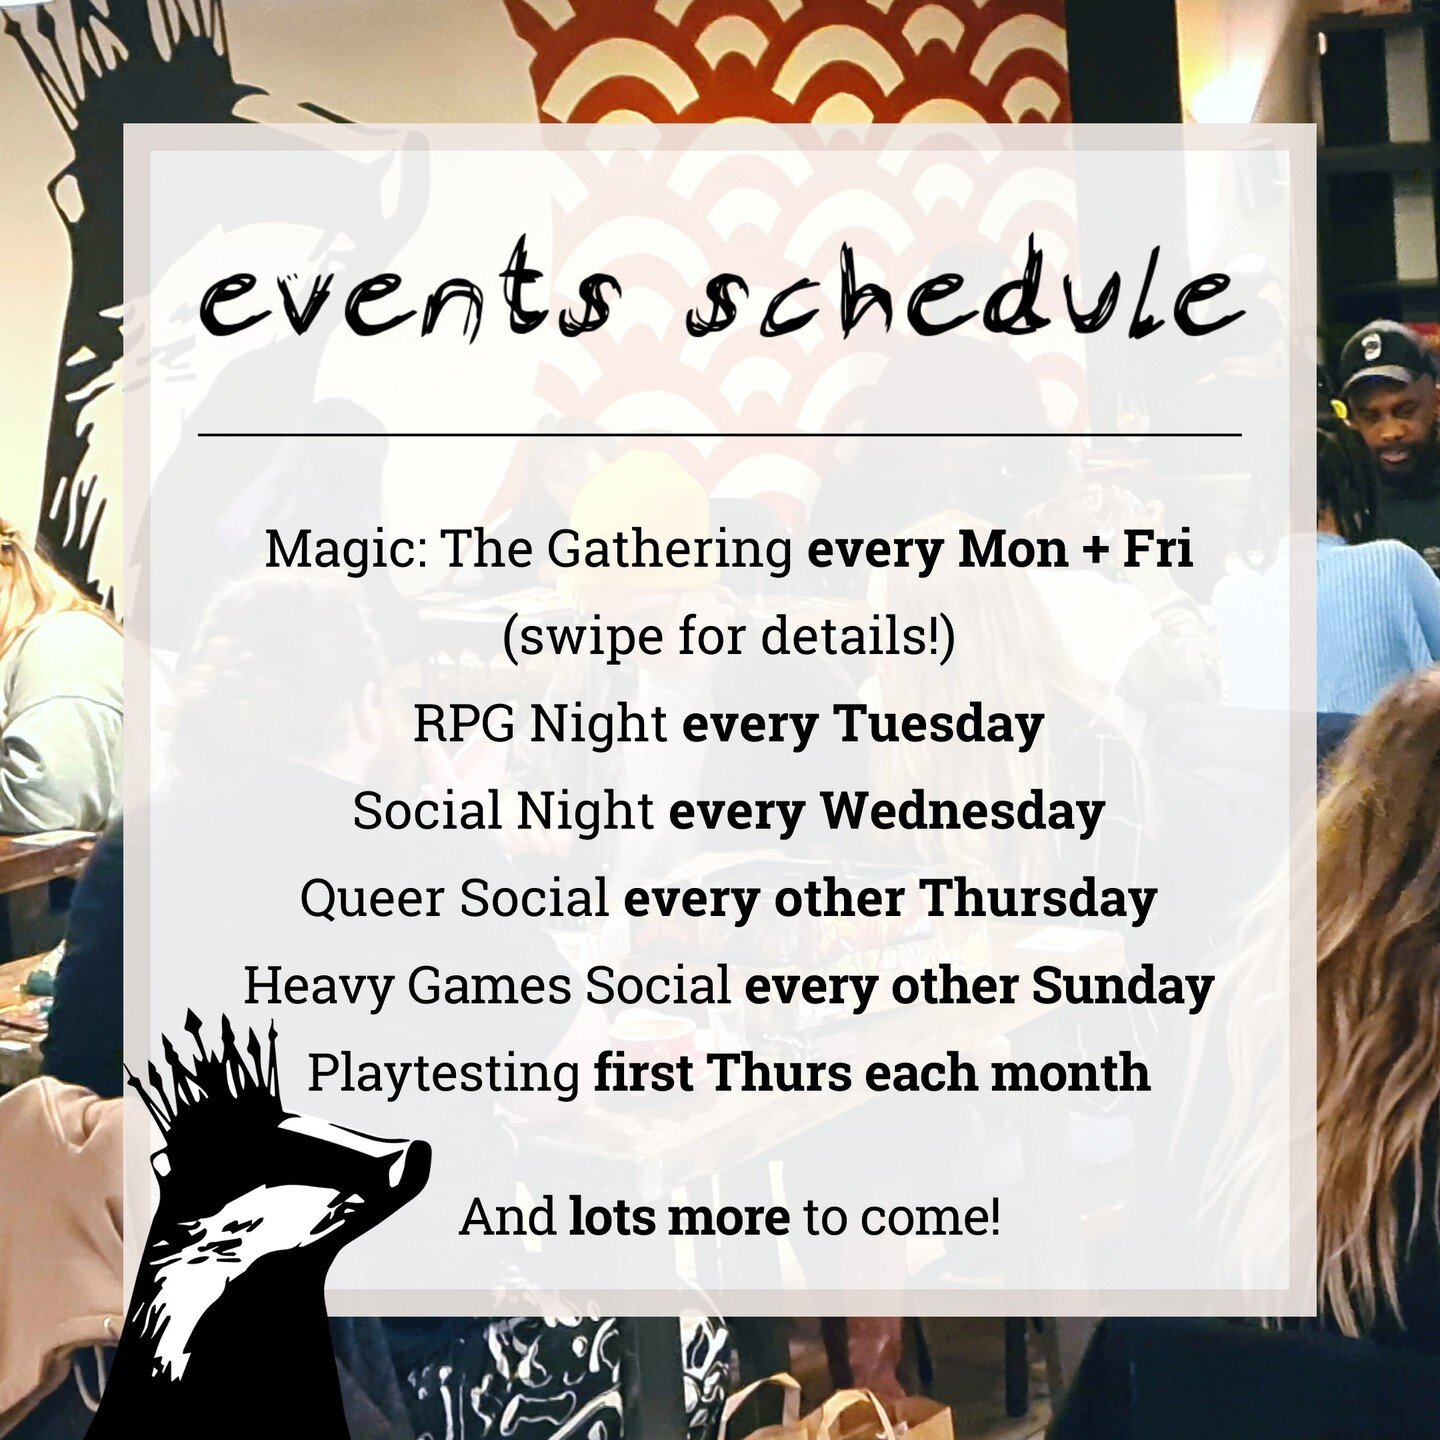 Your new weekly plans: sorted ✔

We're already running 20+ events per month, and are adding more to the schedule all the time!

Have a browse of our events page and sign up to our newsletter to find your new weekly staple. 🎉
badgerbadger.org/events